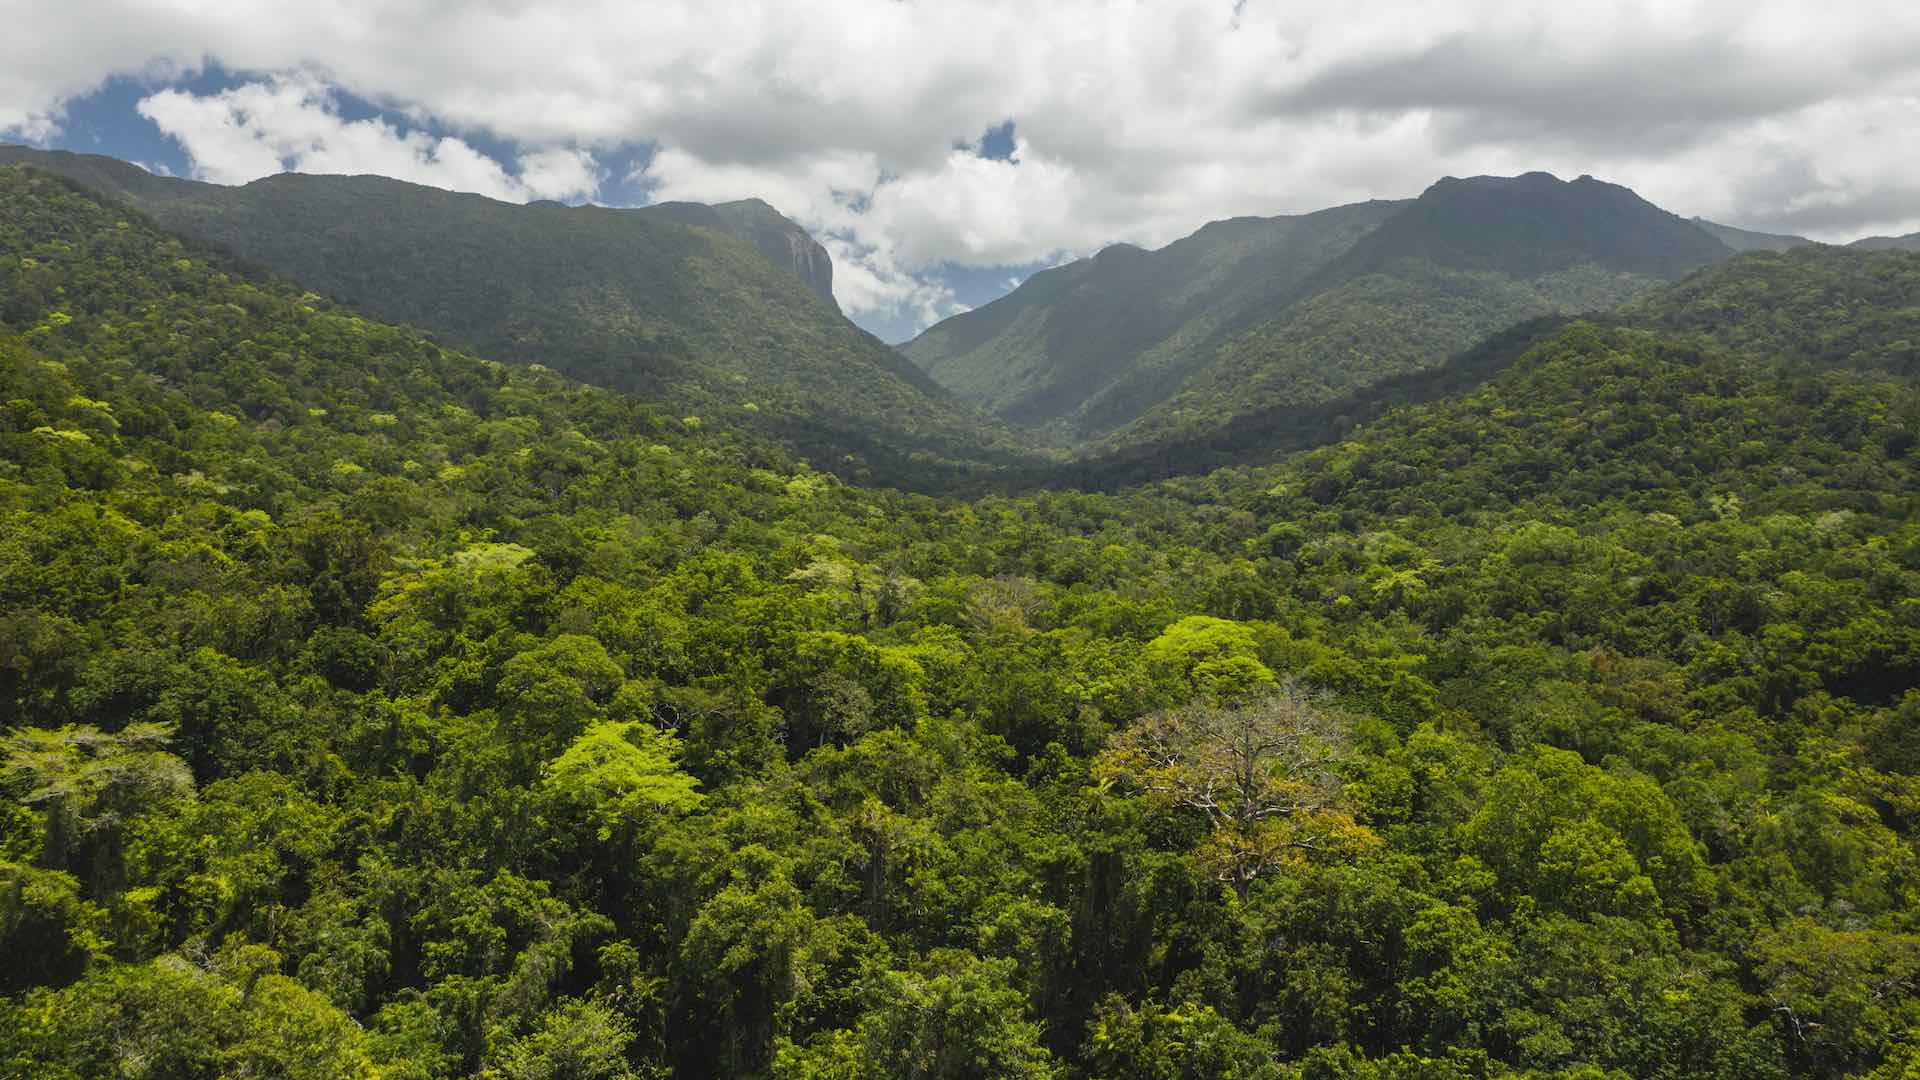 Aerial view of Mossman Gorge, located in the Daintree National Park